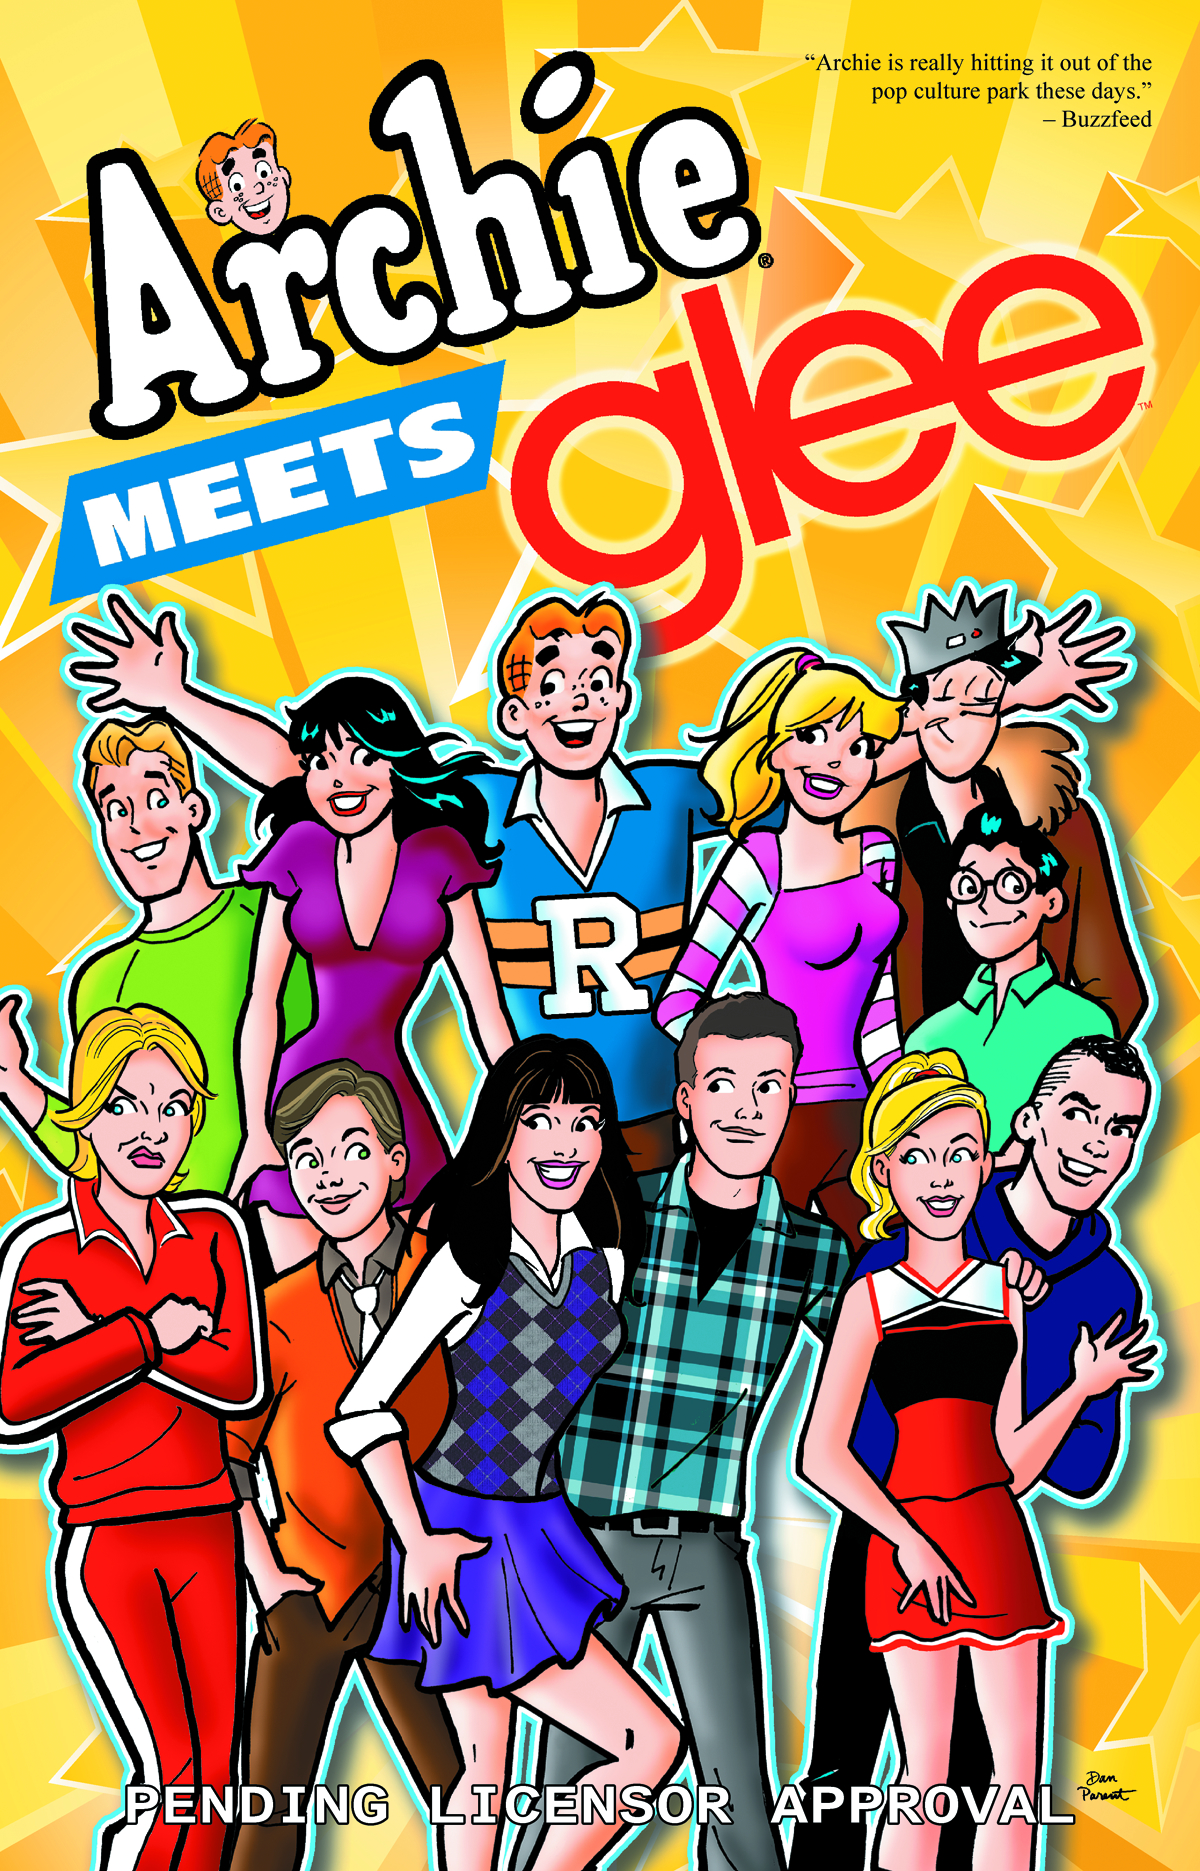 May130810 Archie Meets Glee Tp Previews World